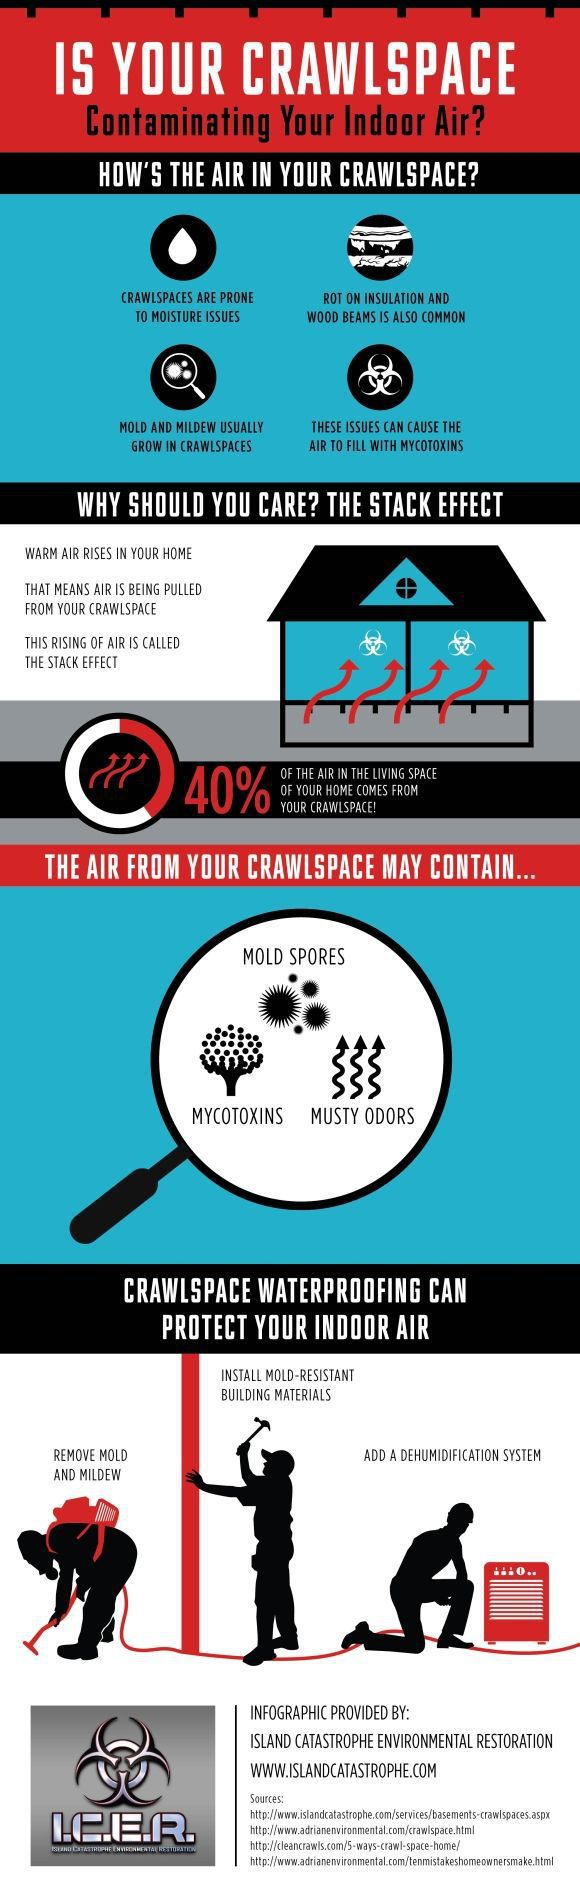 Your Crawlspace And Indoor Air Quality Summary!